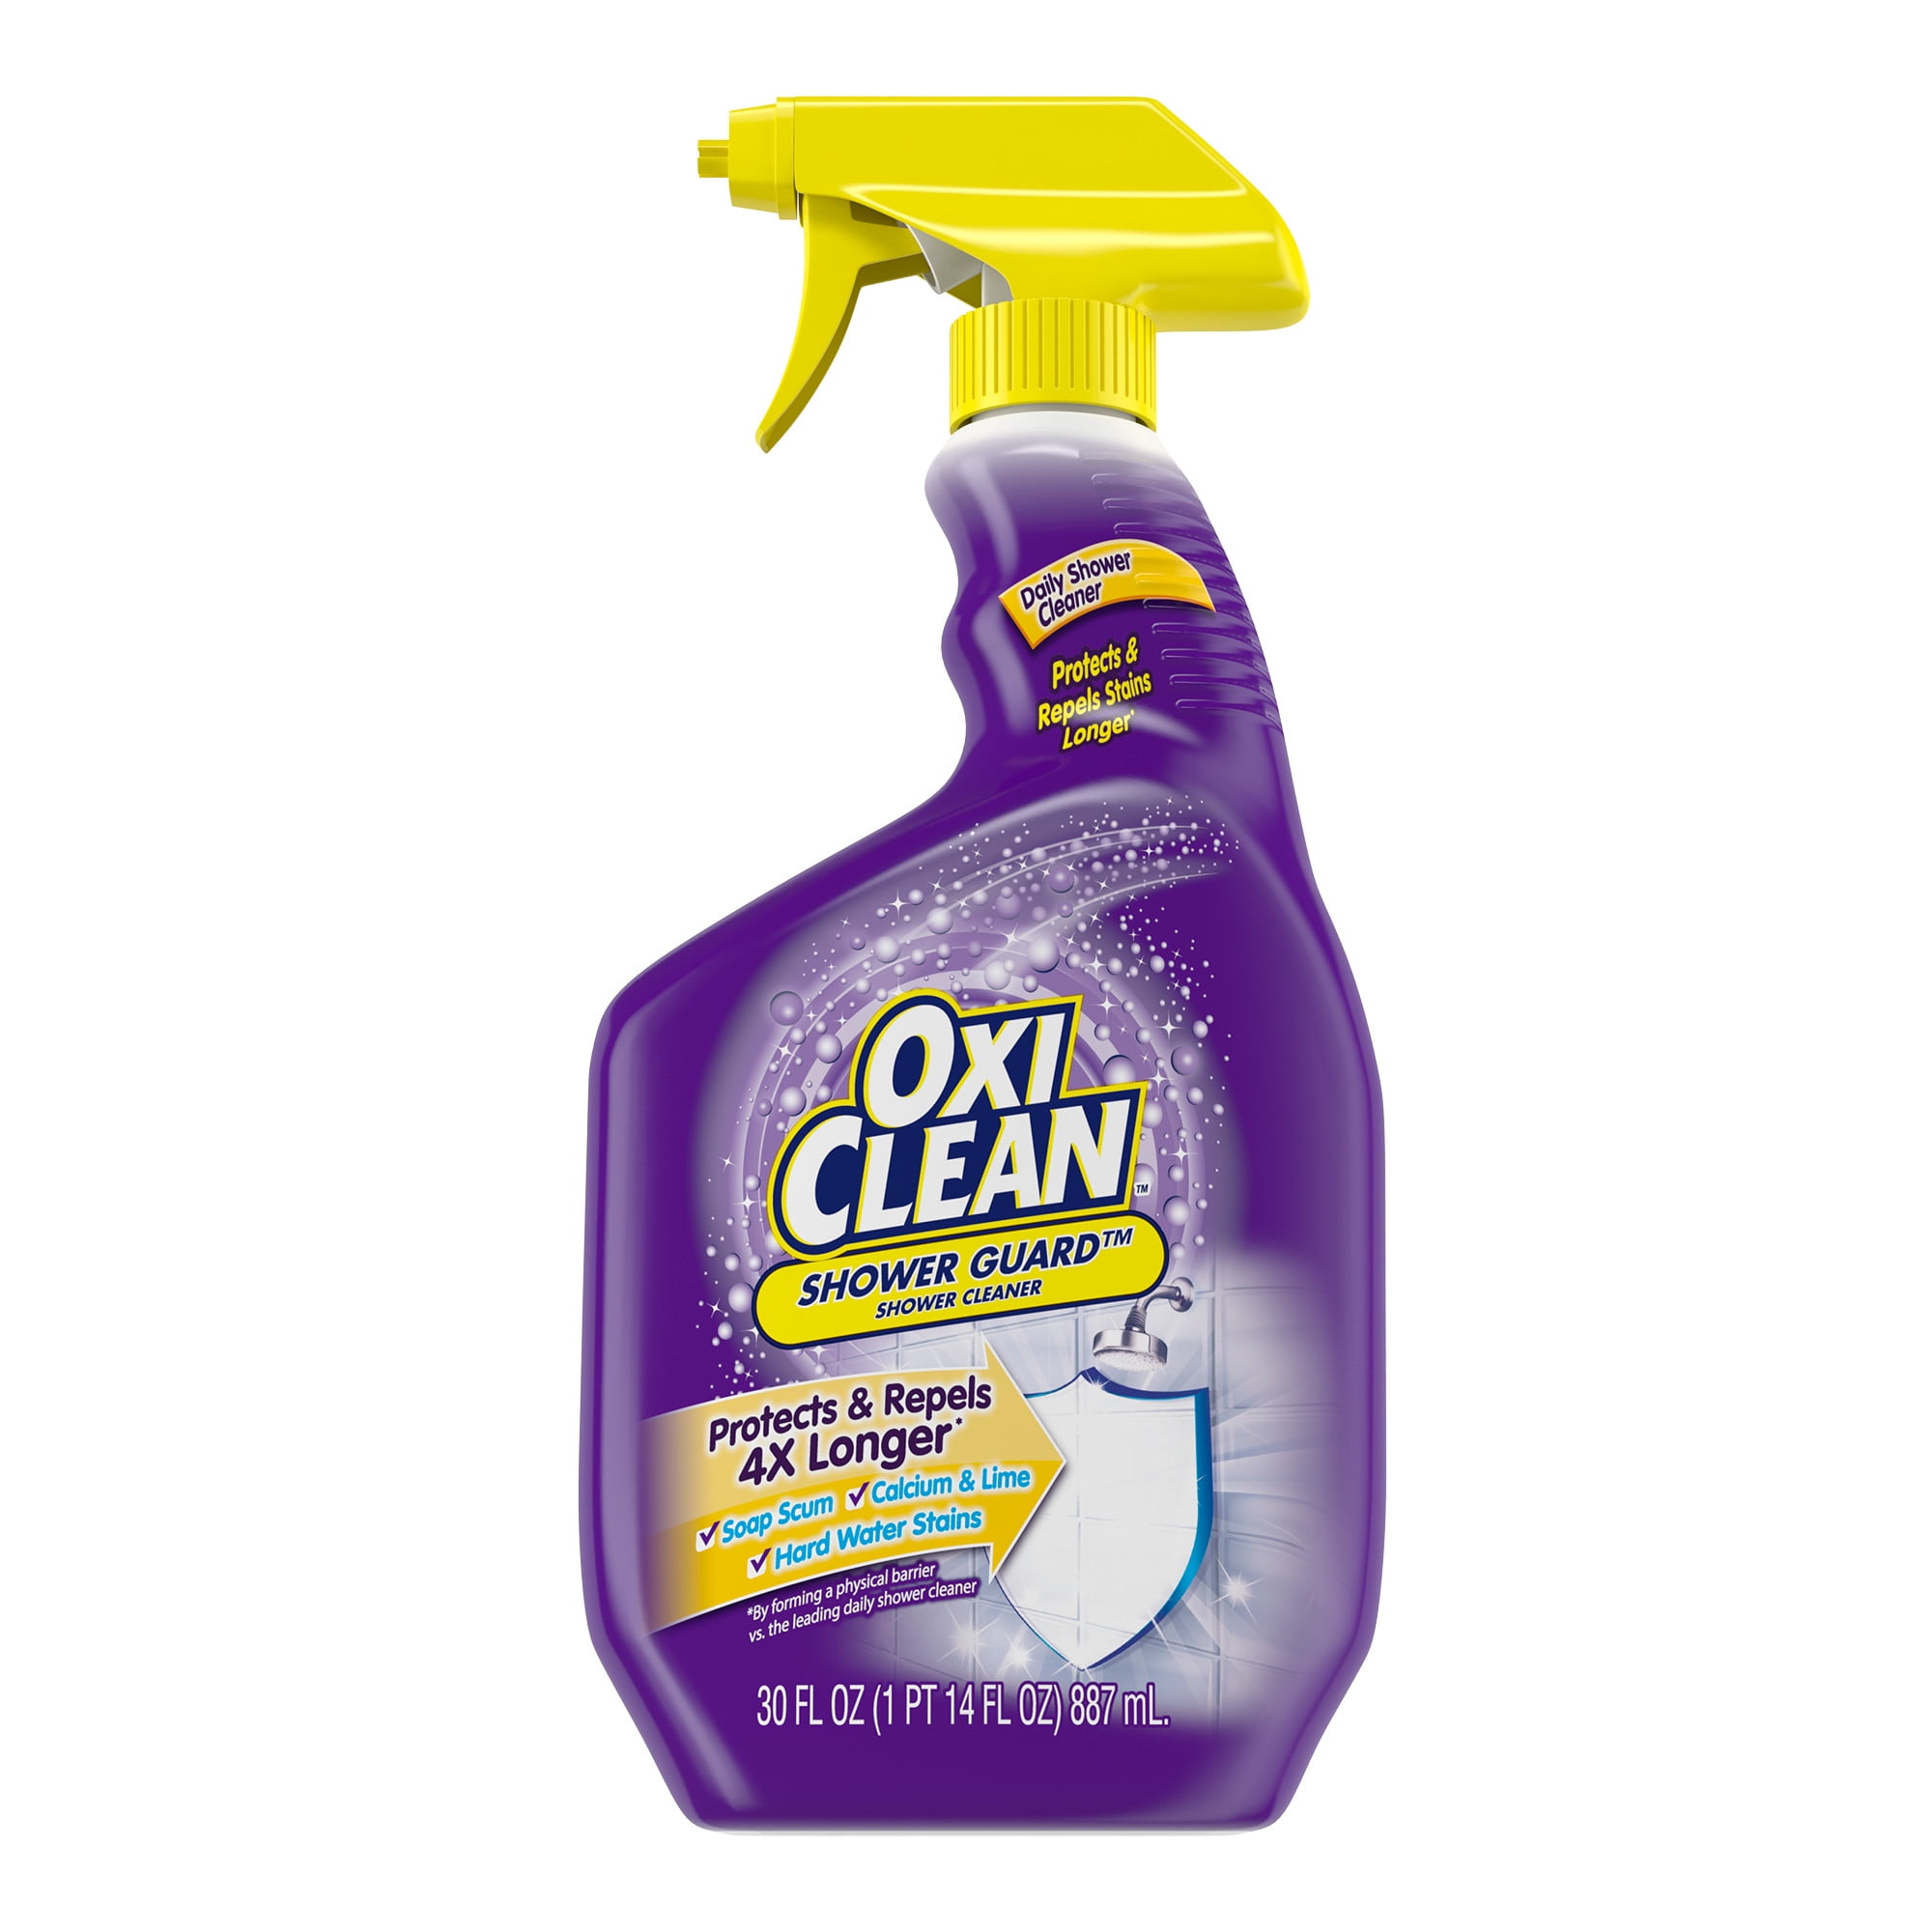 OxiClean Shower Guard Daily Shower Cleaner, 30 oz., Protects & Repels  Stains 